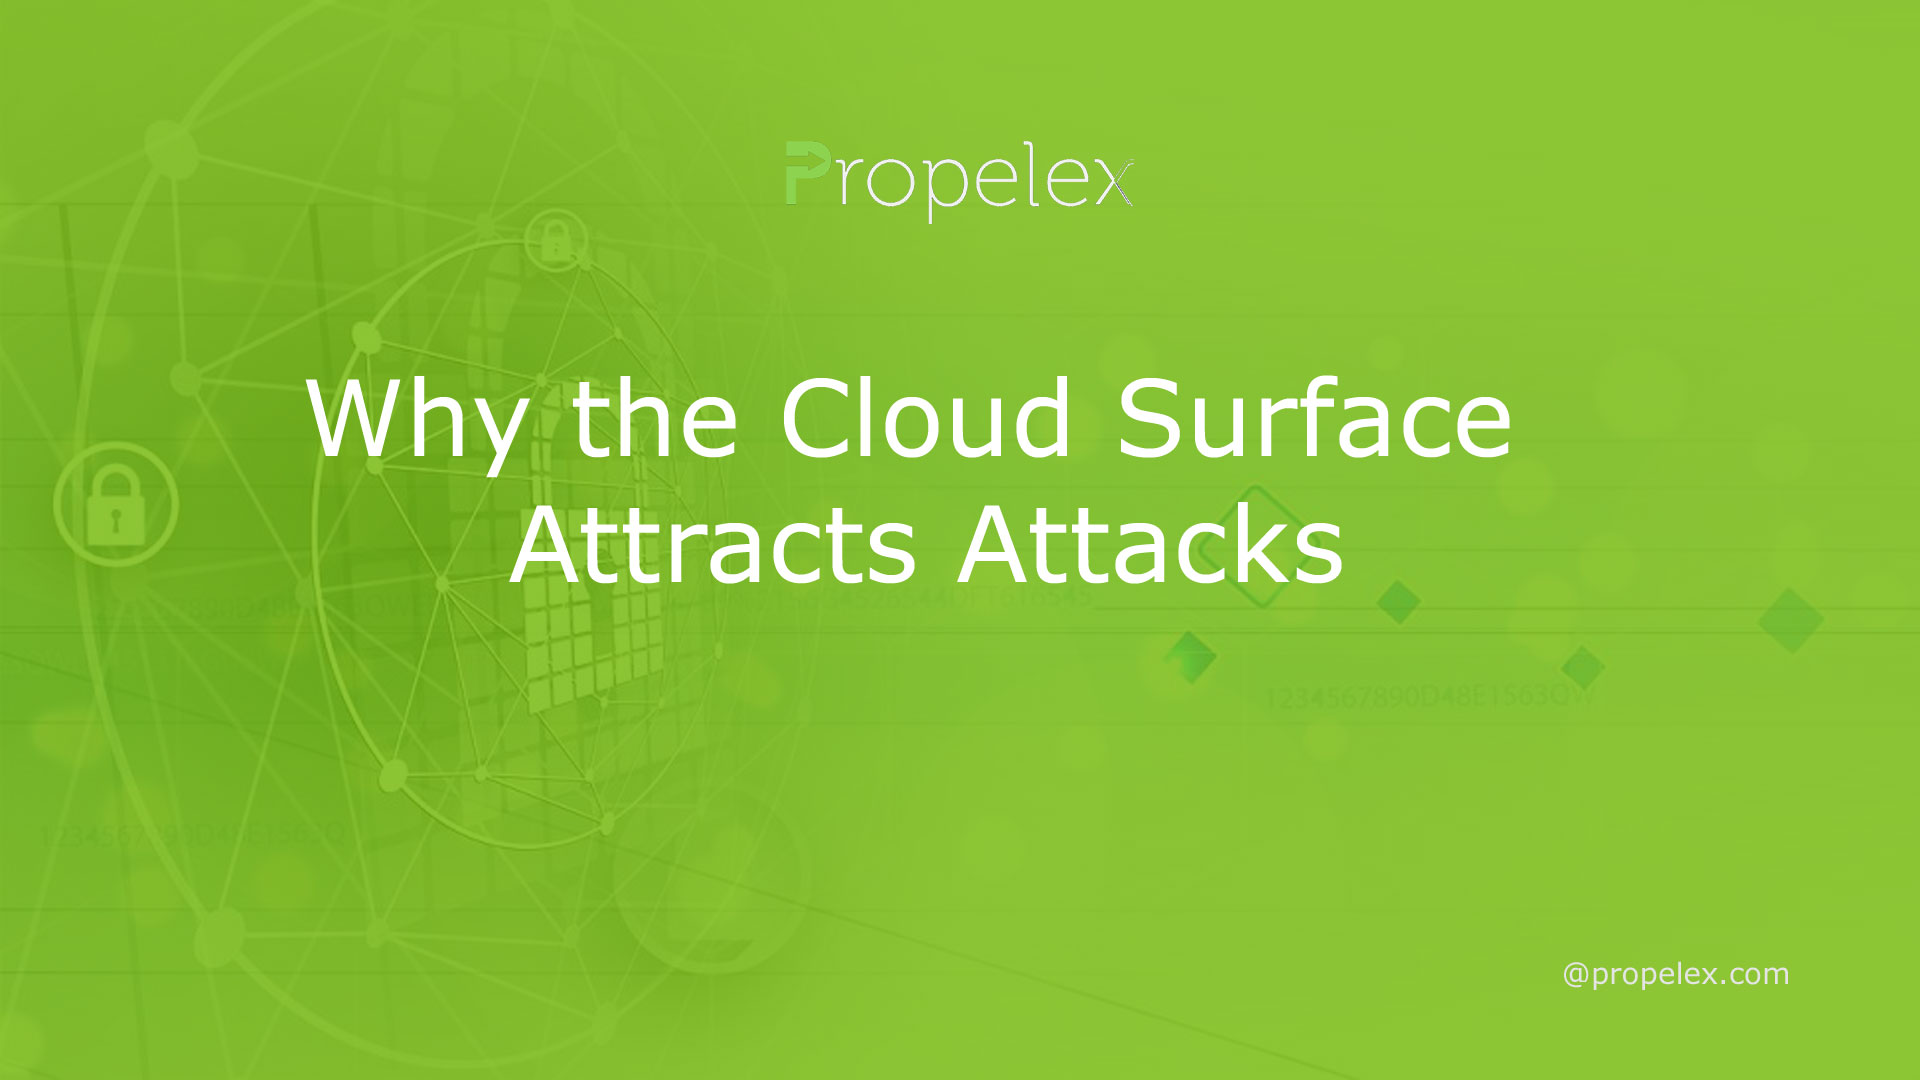 Why the Cloud Surface Attracts Attacks